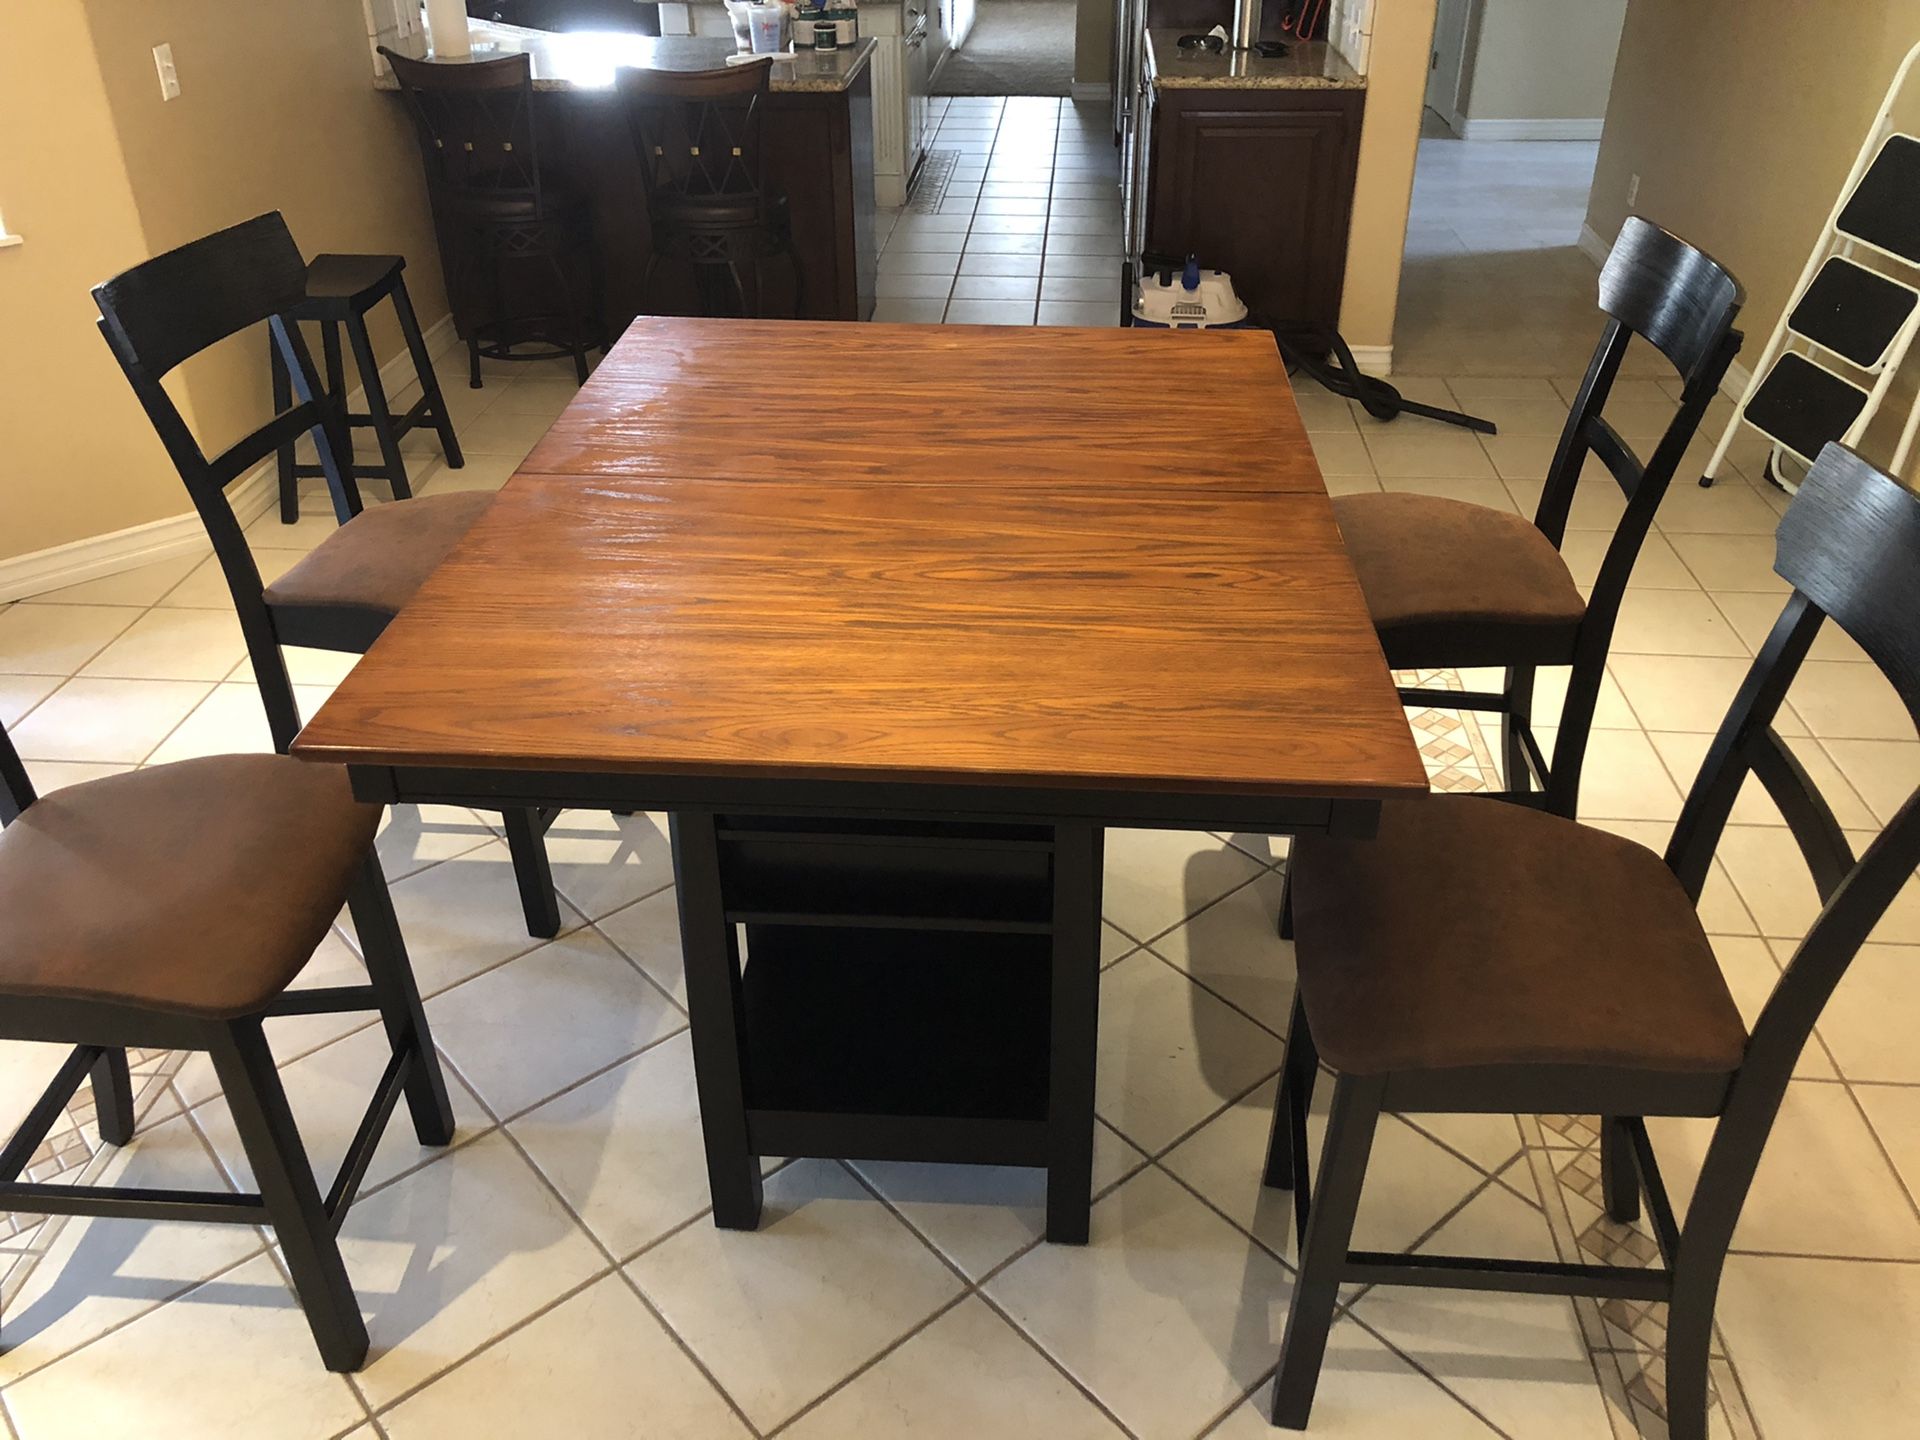 Counter height kitchen table set